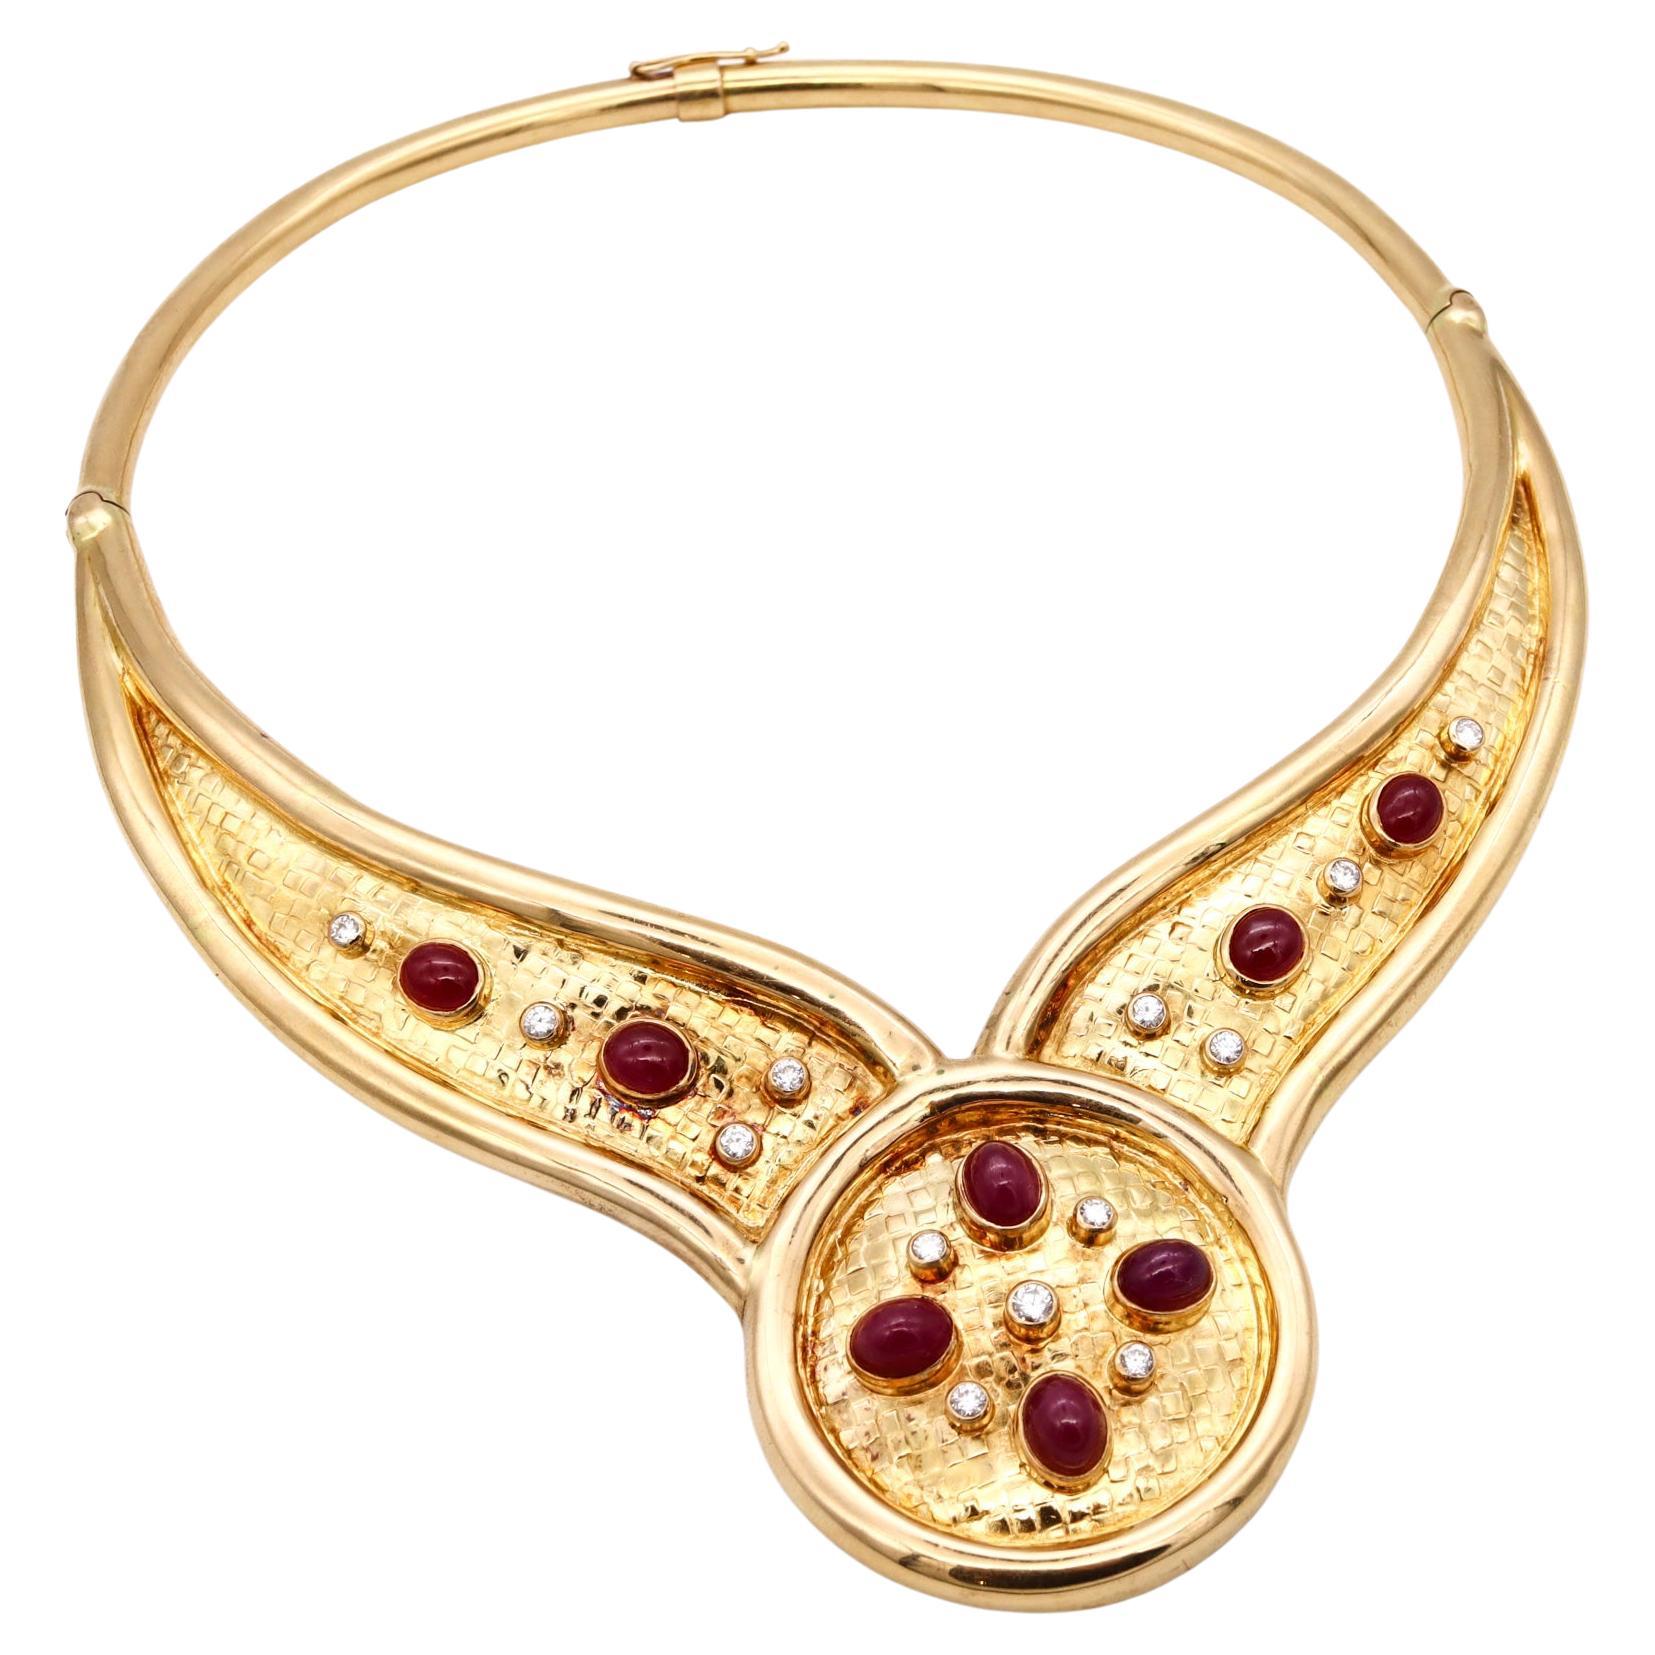 Lalaounis Greece Choker Necklace 18Kt Yellow Gold With 16.67 Cts Diamonds Rubies